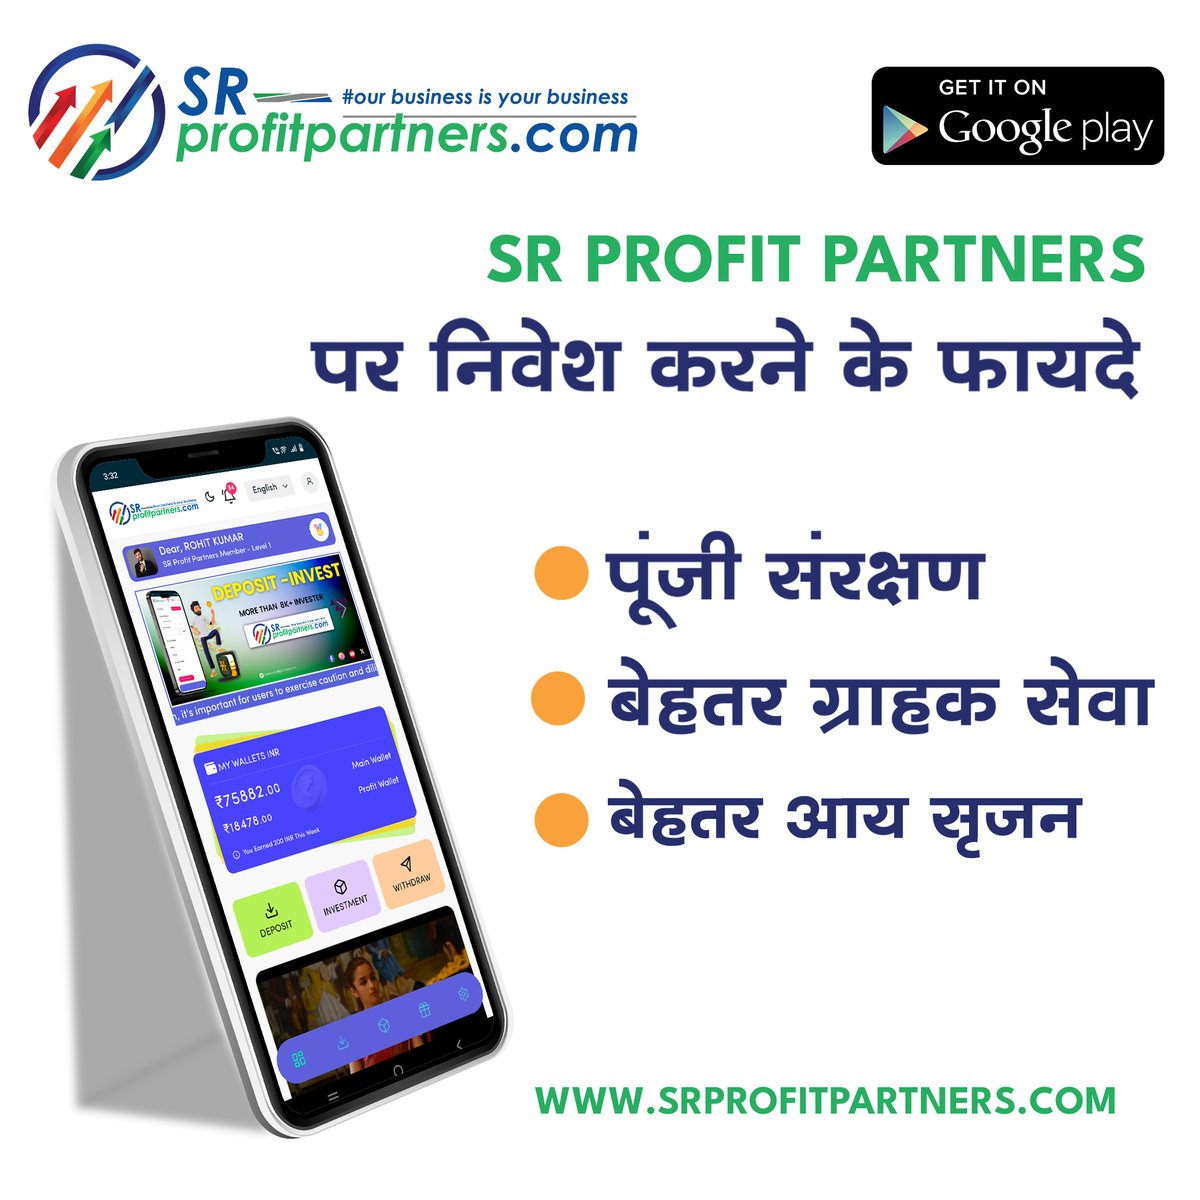 sr profit partners पर इन्वेस्ट करने के फायदे :
* SECURE YOUR FOUND
* CUSTOMER CARE SARVICE
* CAPITAL GAIN
call / whatsaap 6261621077
Email : srprofitpartners.com

#InvestingMadeEasy #GrowYourWealth
#FinancialFreedom
#SmartInvesting
#MaximizeReturns #SecureYourFuture